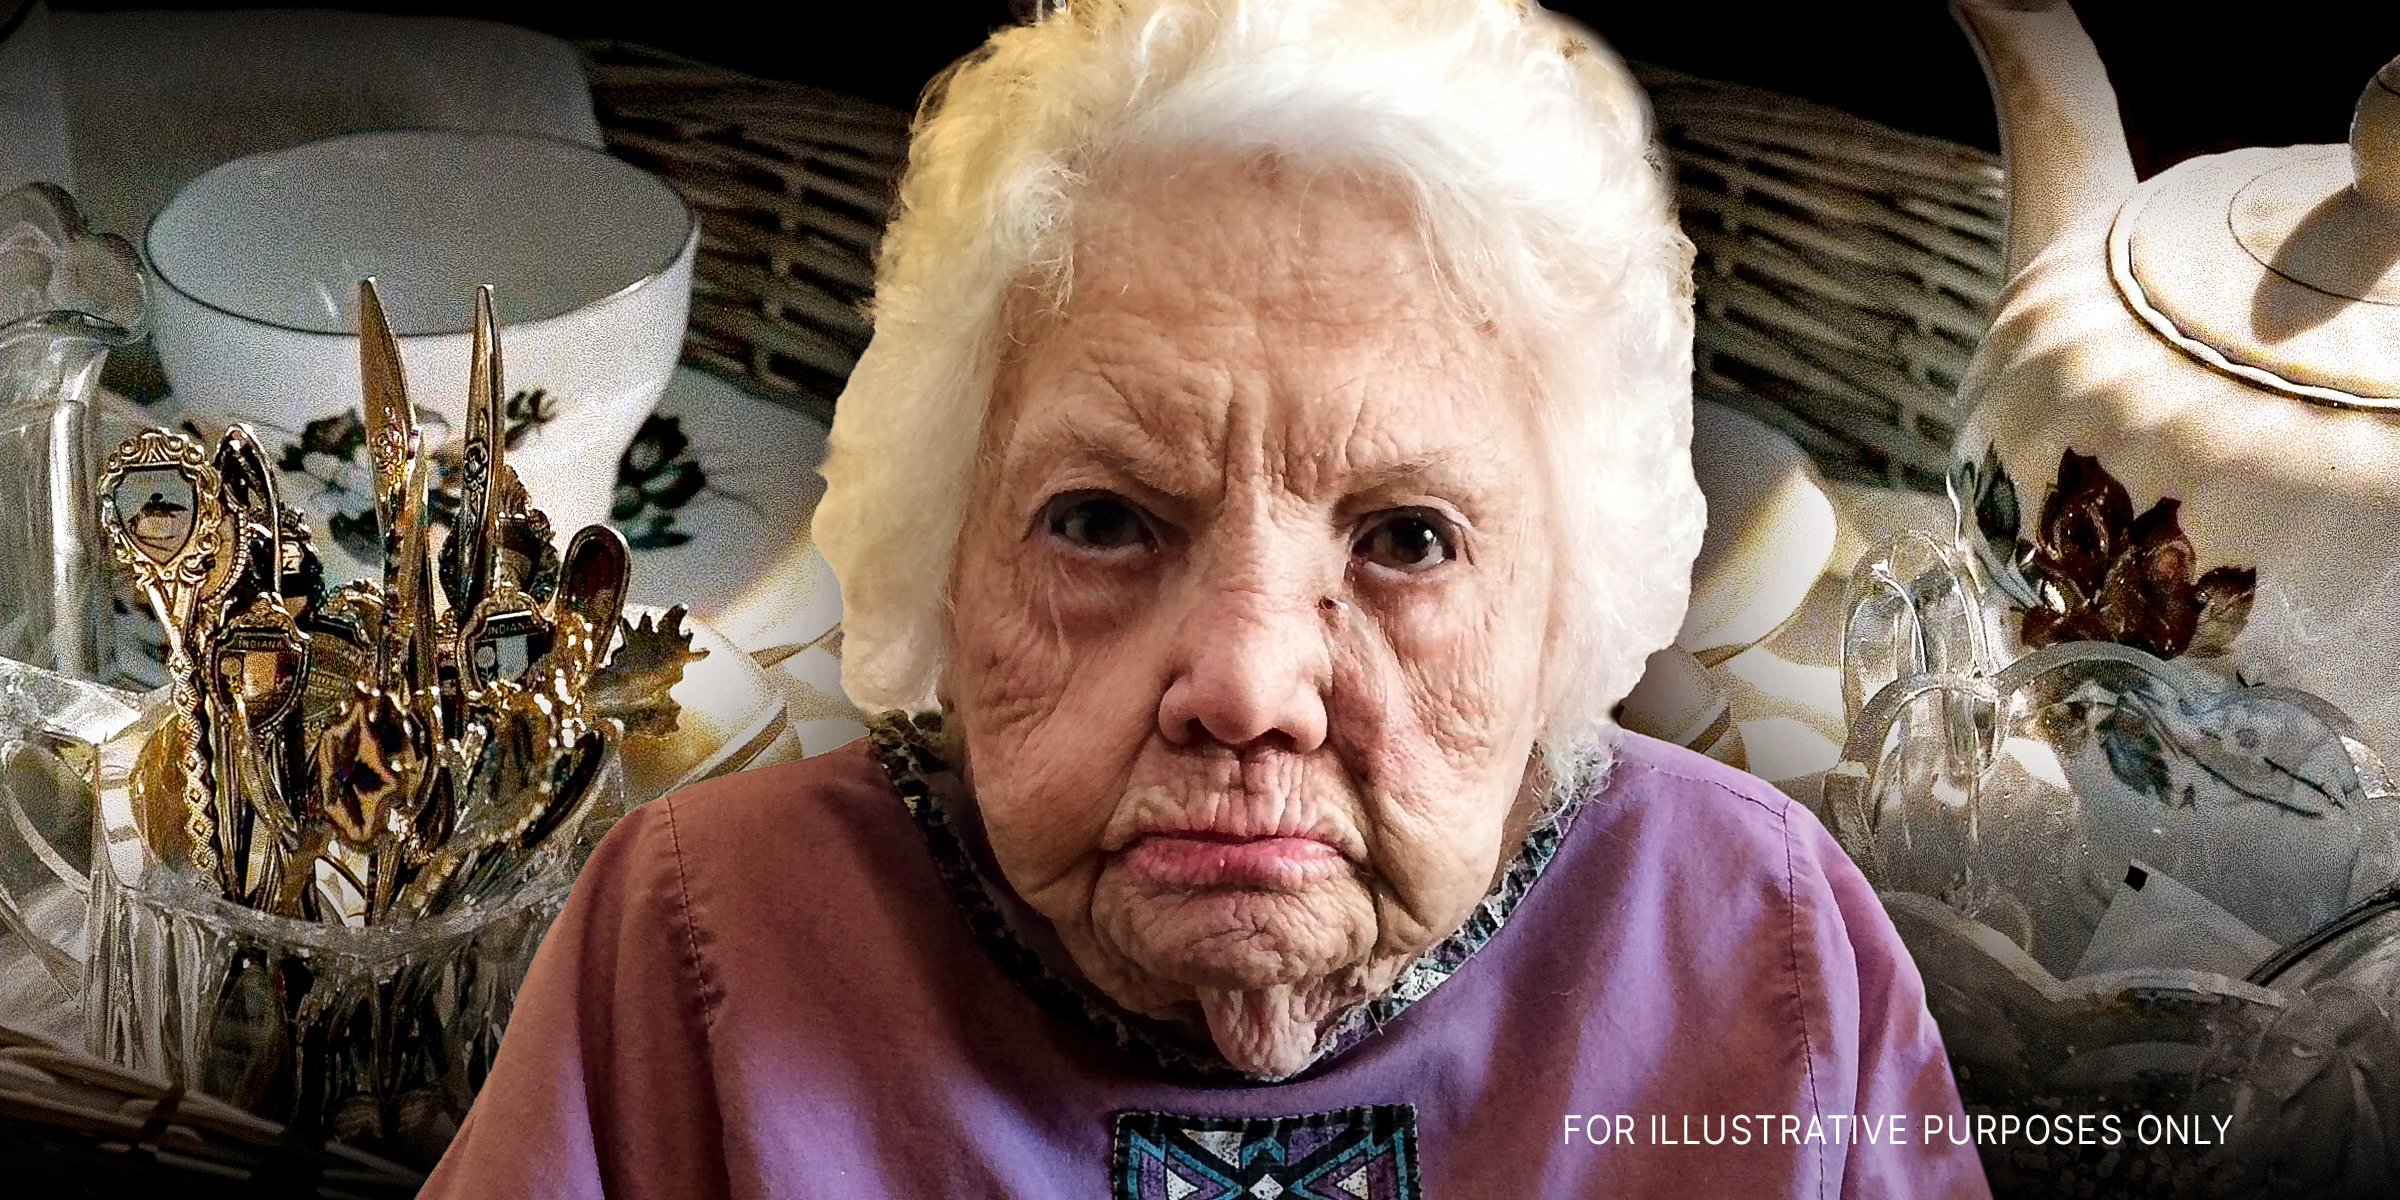 An angry older woman | Source: Flickr